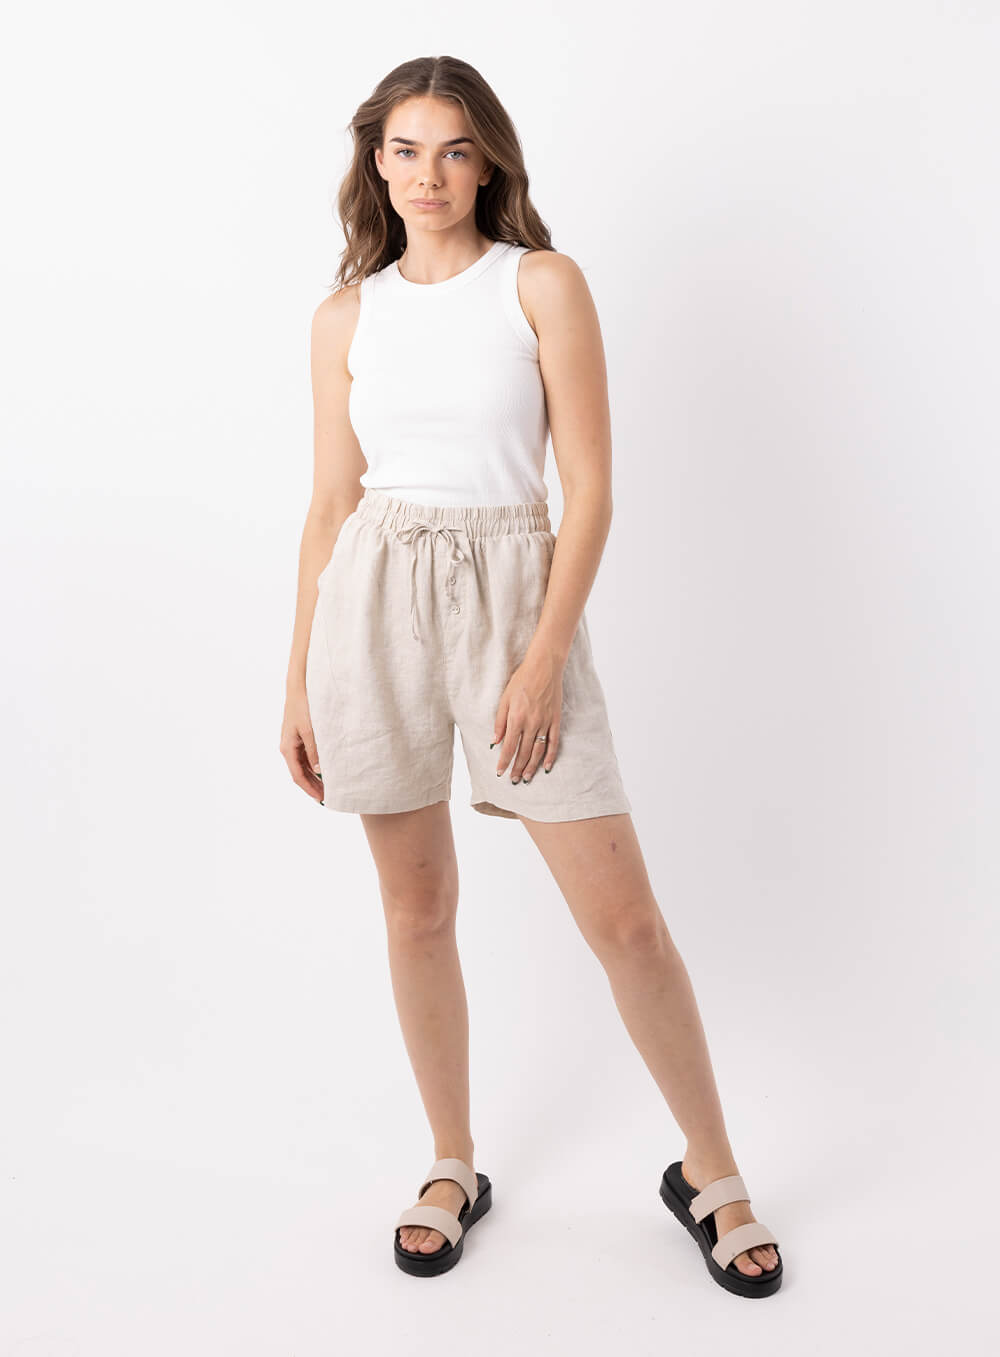 Adeline linen short in beige has 20mm elestic wiast band with tie. It has 2 side pockets, is mid thigh length with 100% breathabe linen fabric.. 